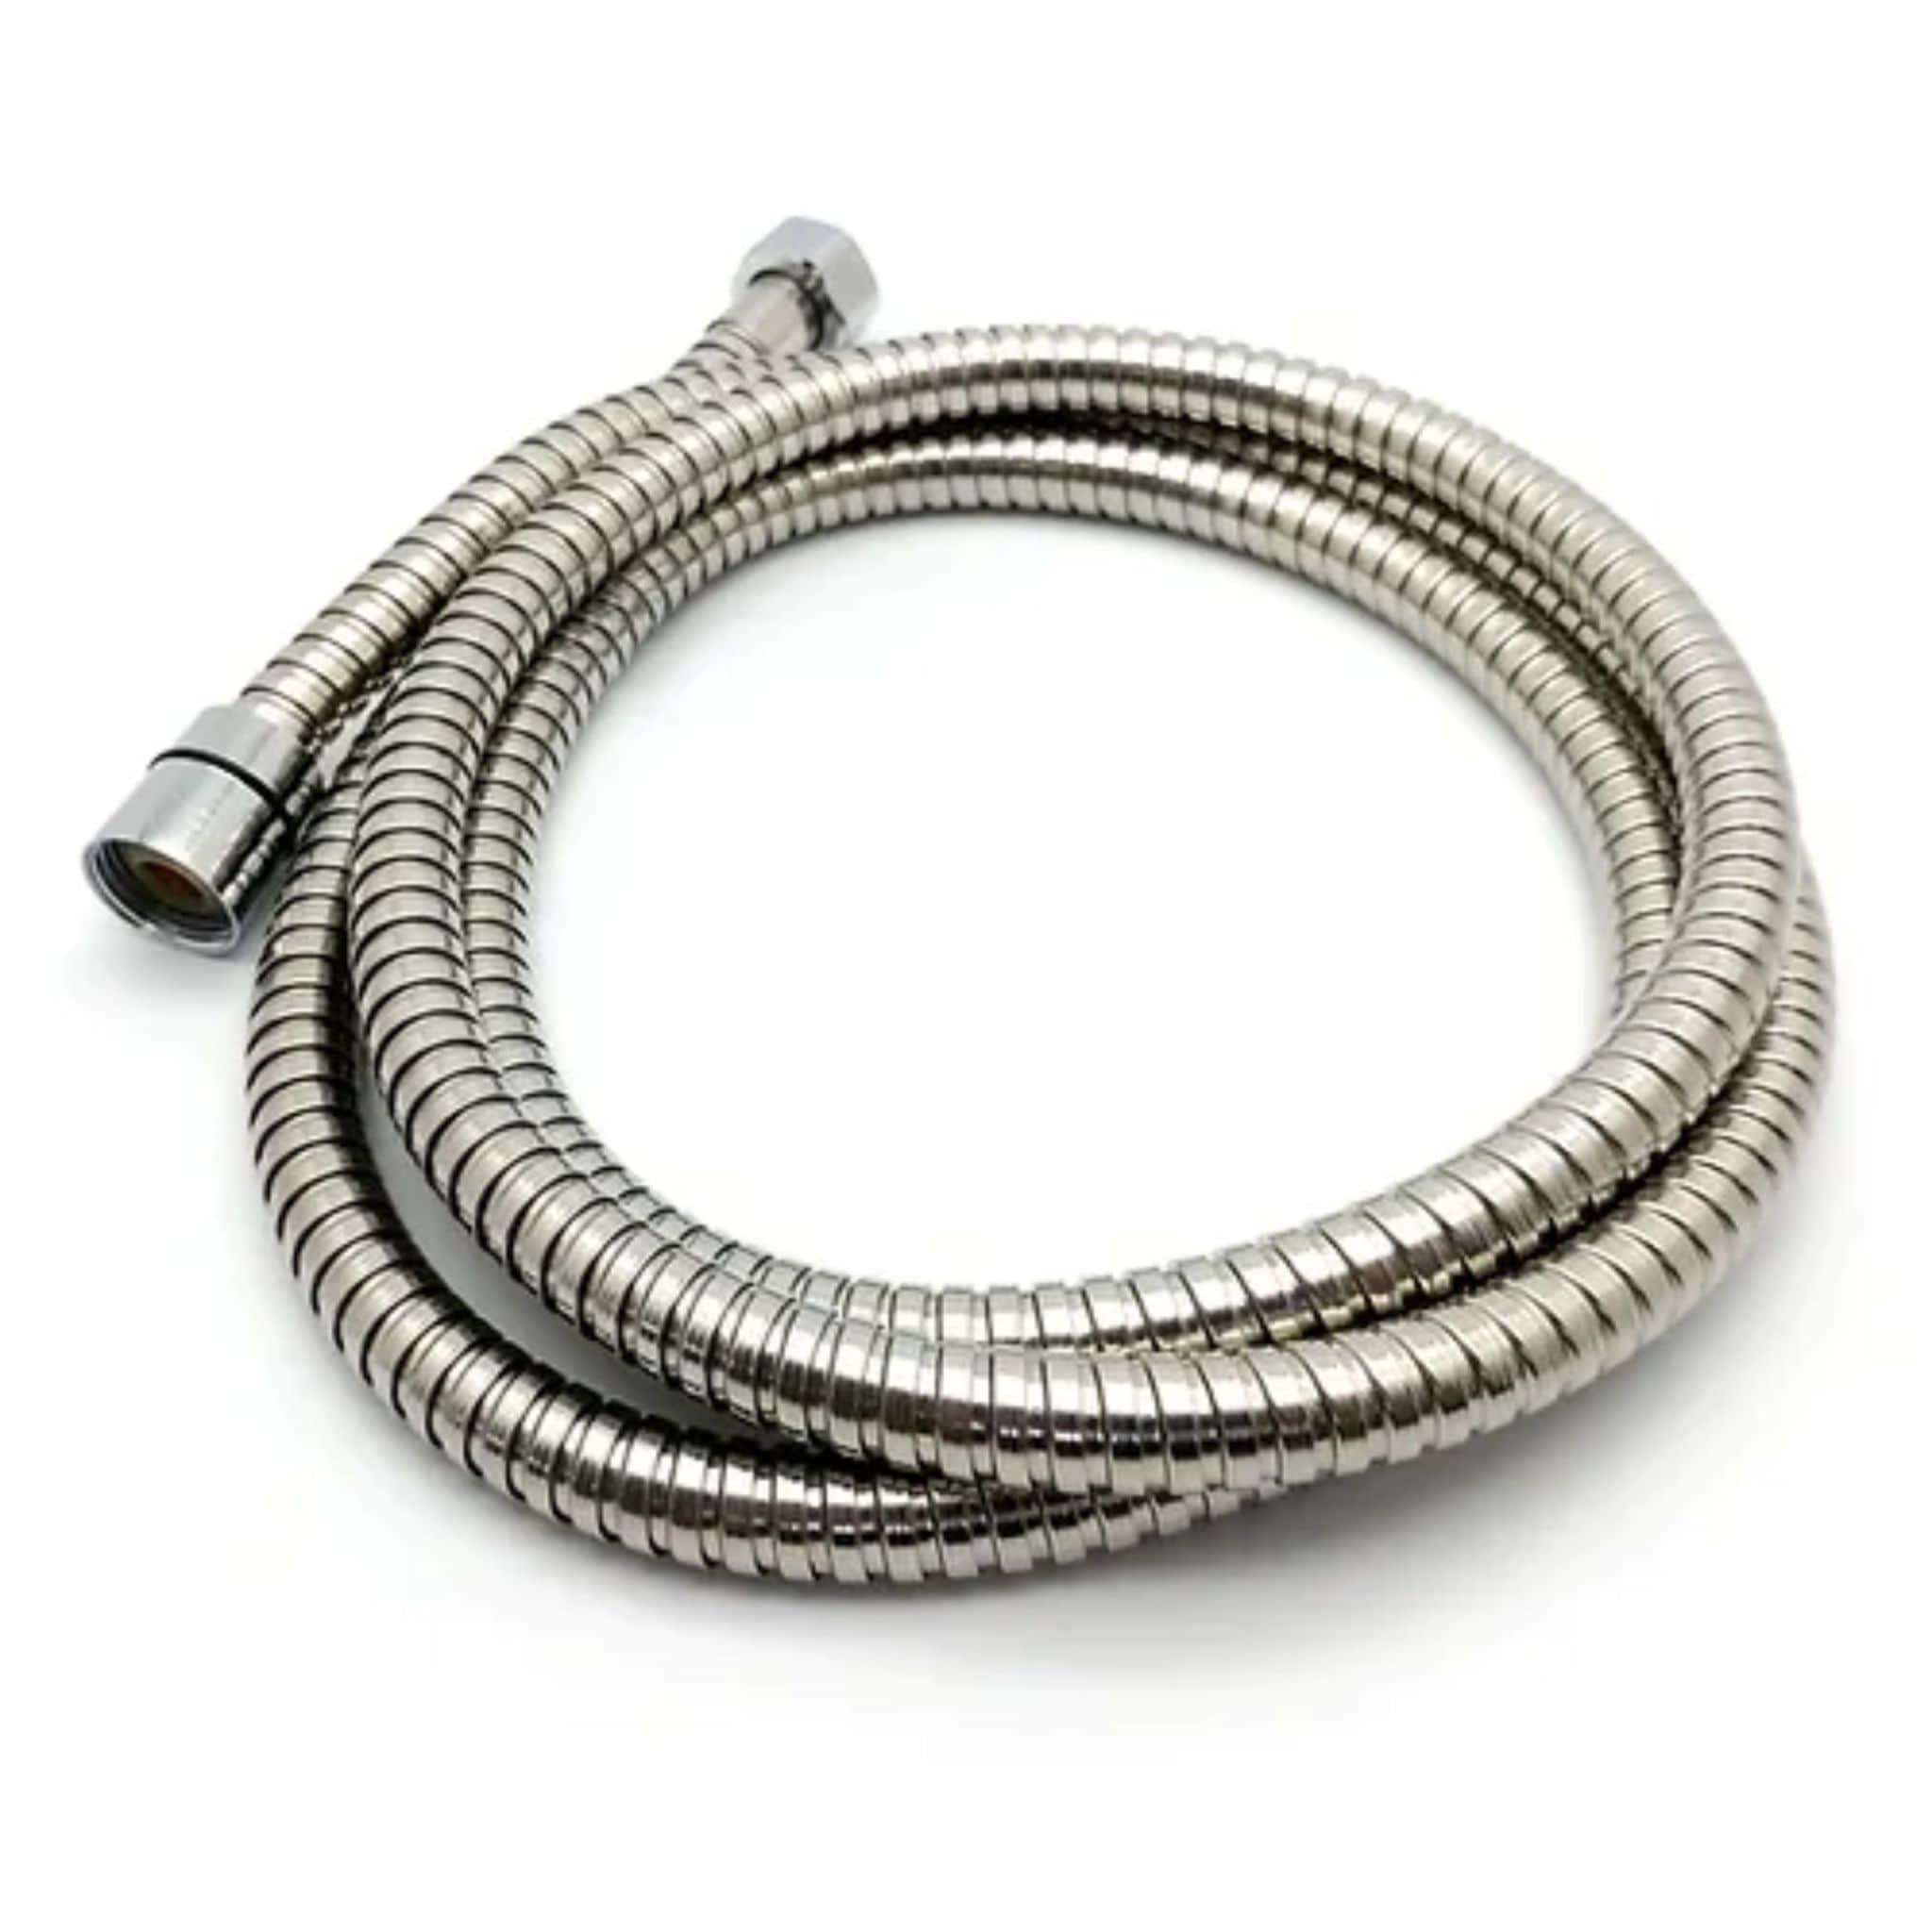 OE SmoothPour 2M Stainless Steel Hand Shower Flexi Pipe – Sleek, Flexible, and Durable Shower Hose